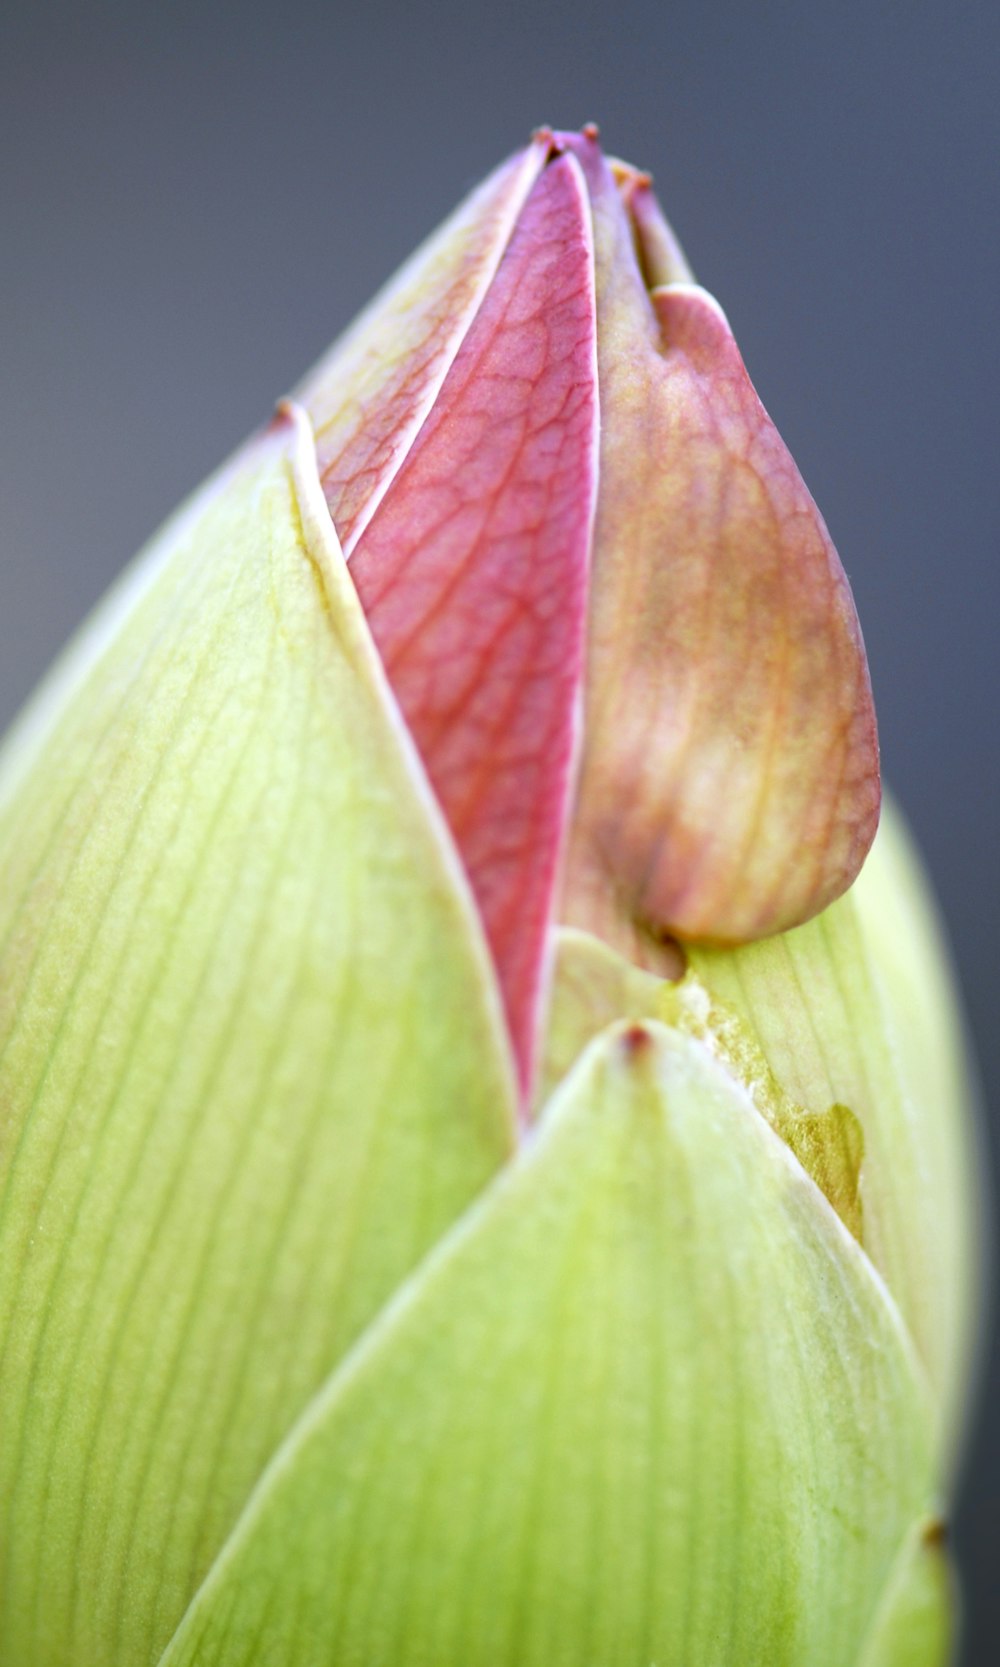 a close up view of a flower bud